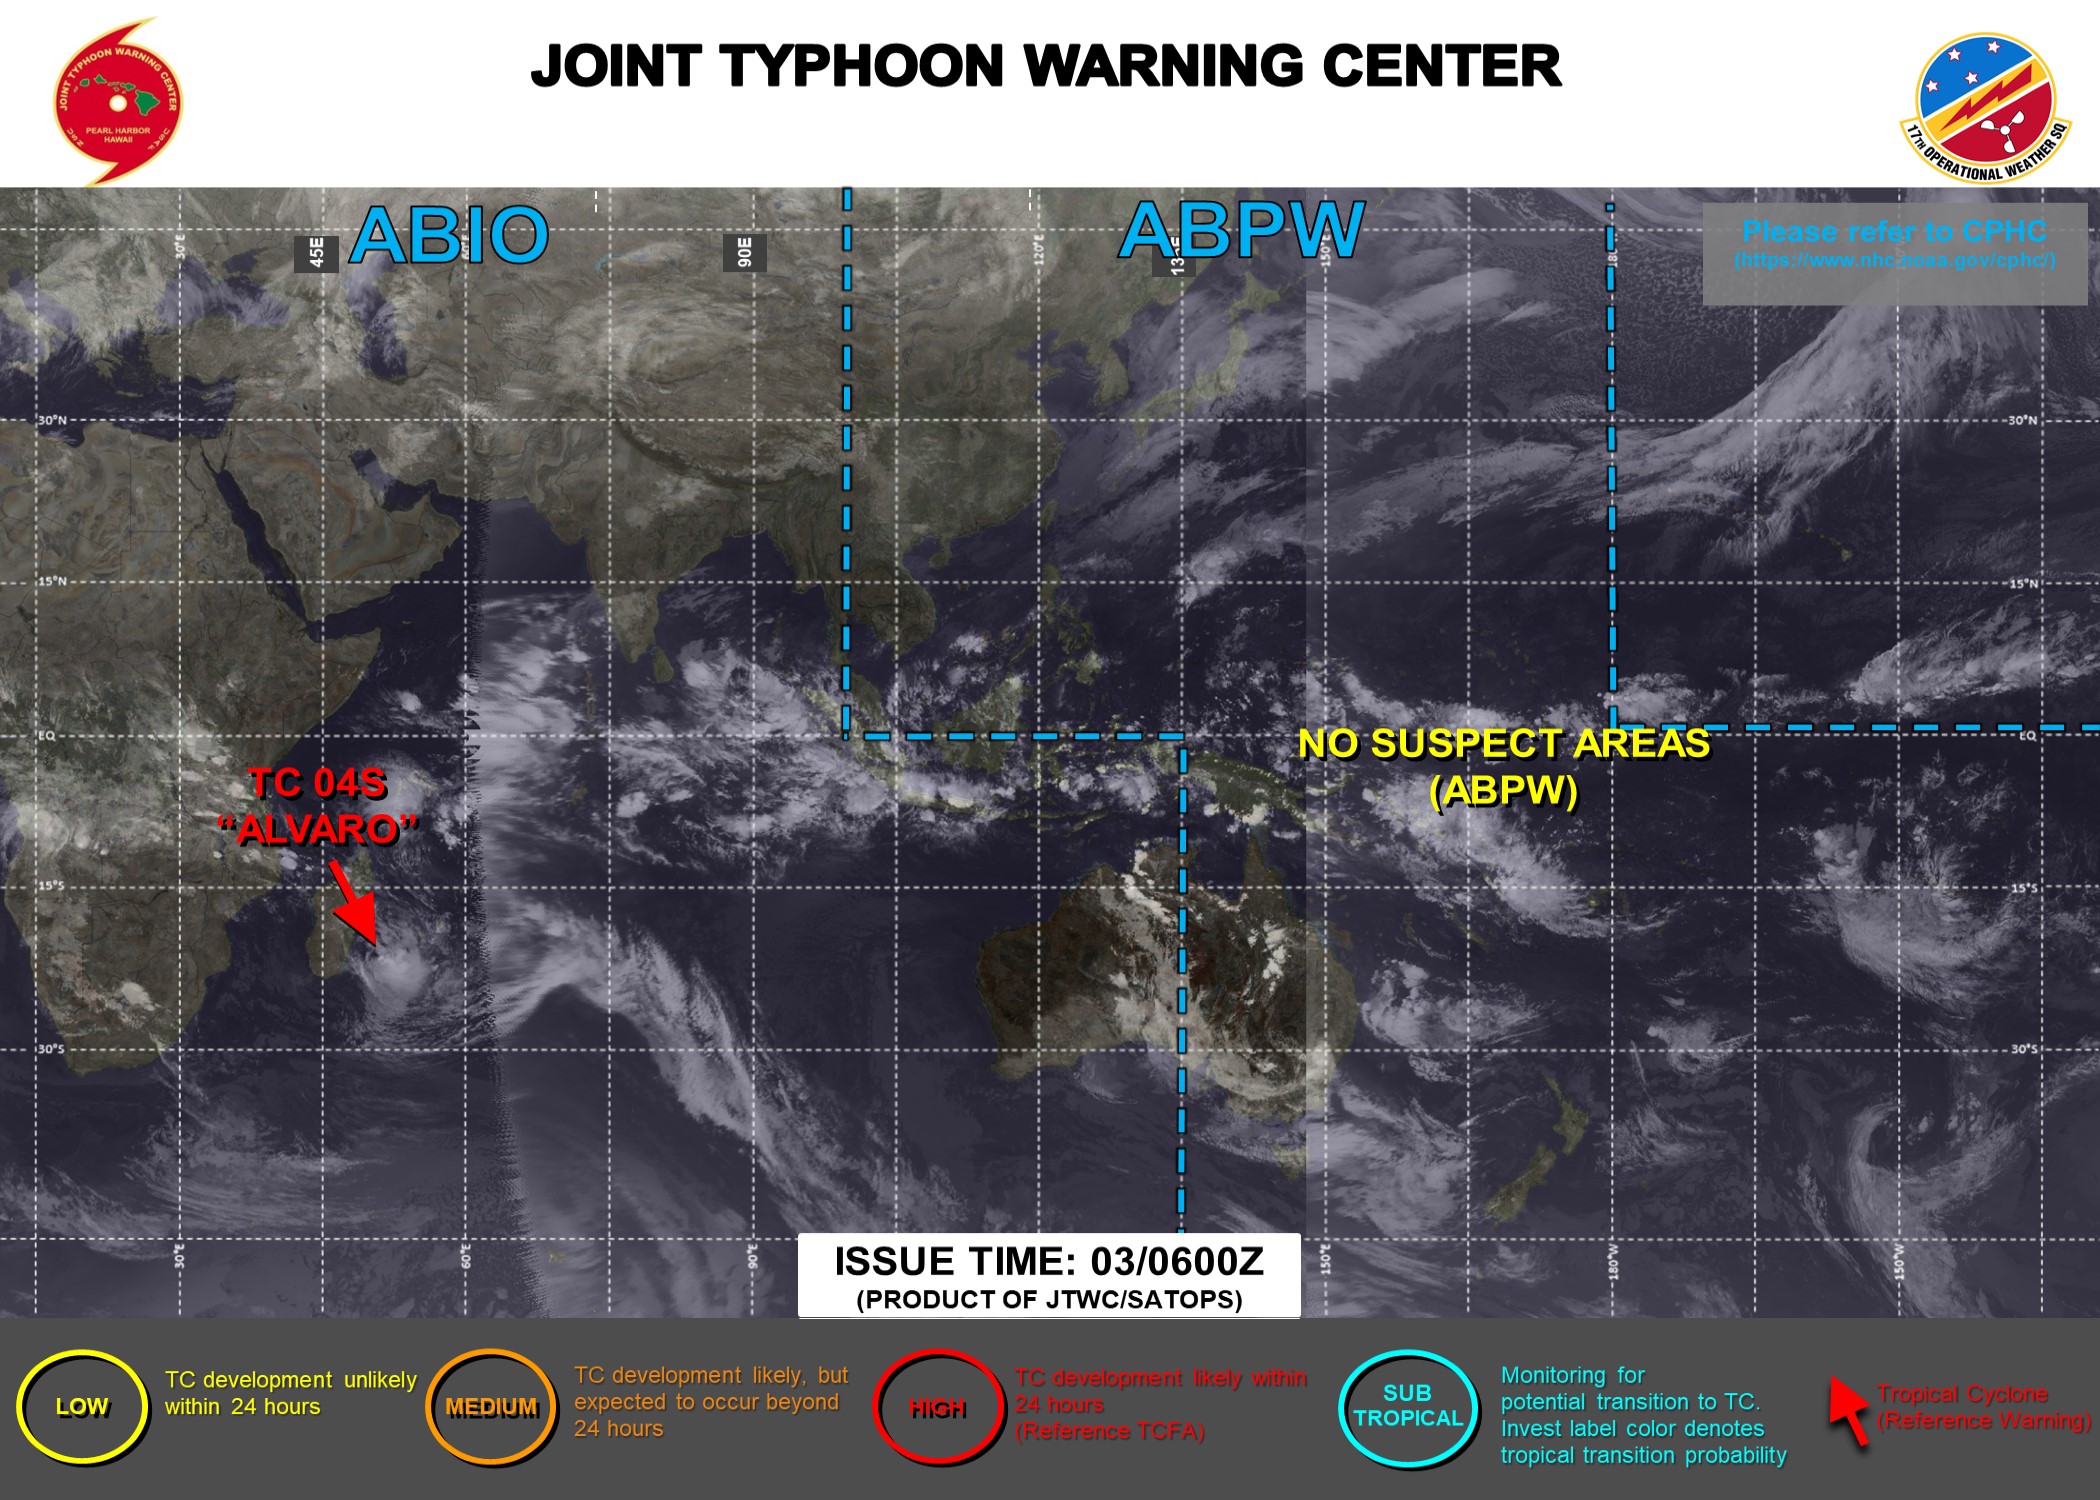 JTWC IS ISSUING 12HOURLY WARNINGS AND 3HOURLY SATELLITE BULLETINS ON TC 04S(ALVARO).